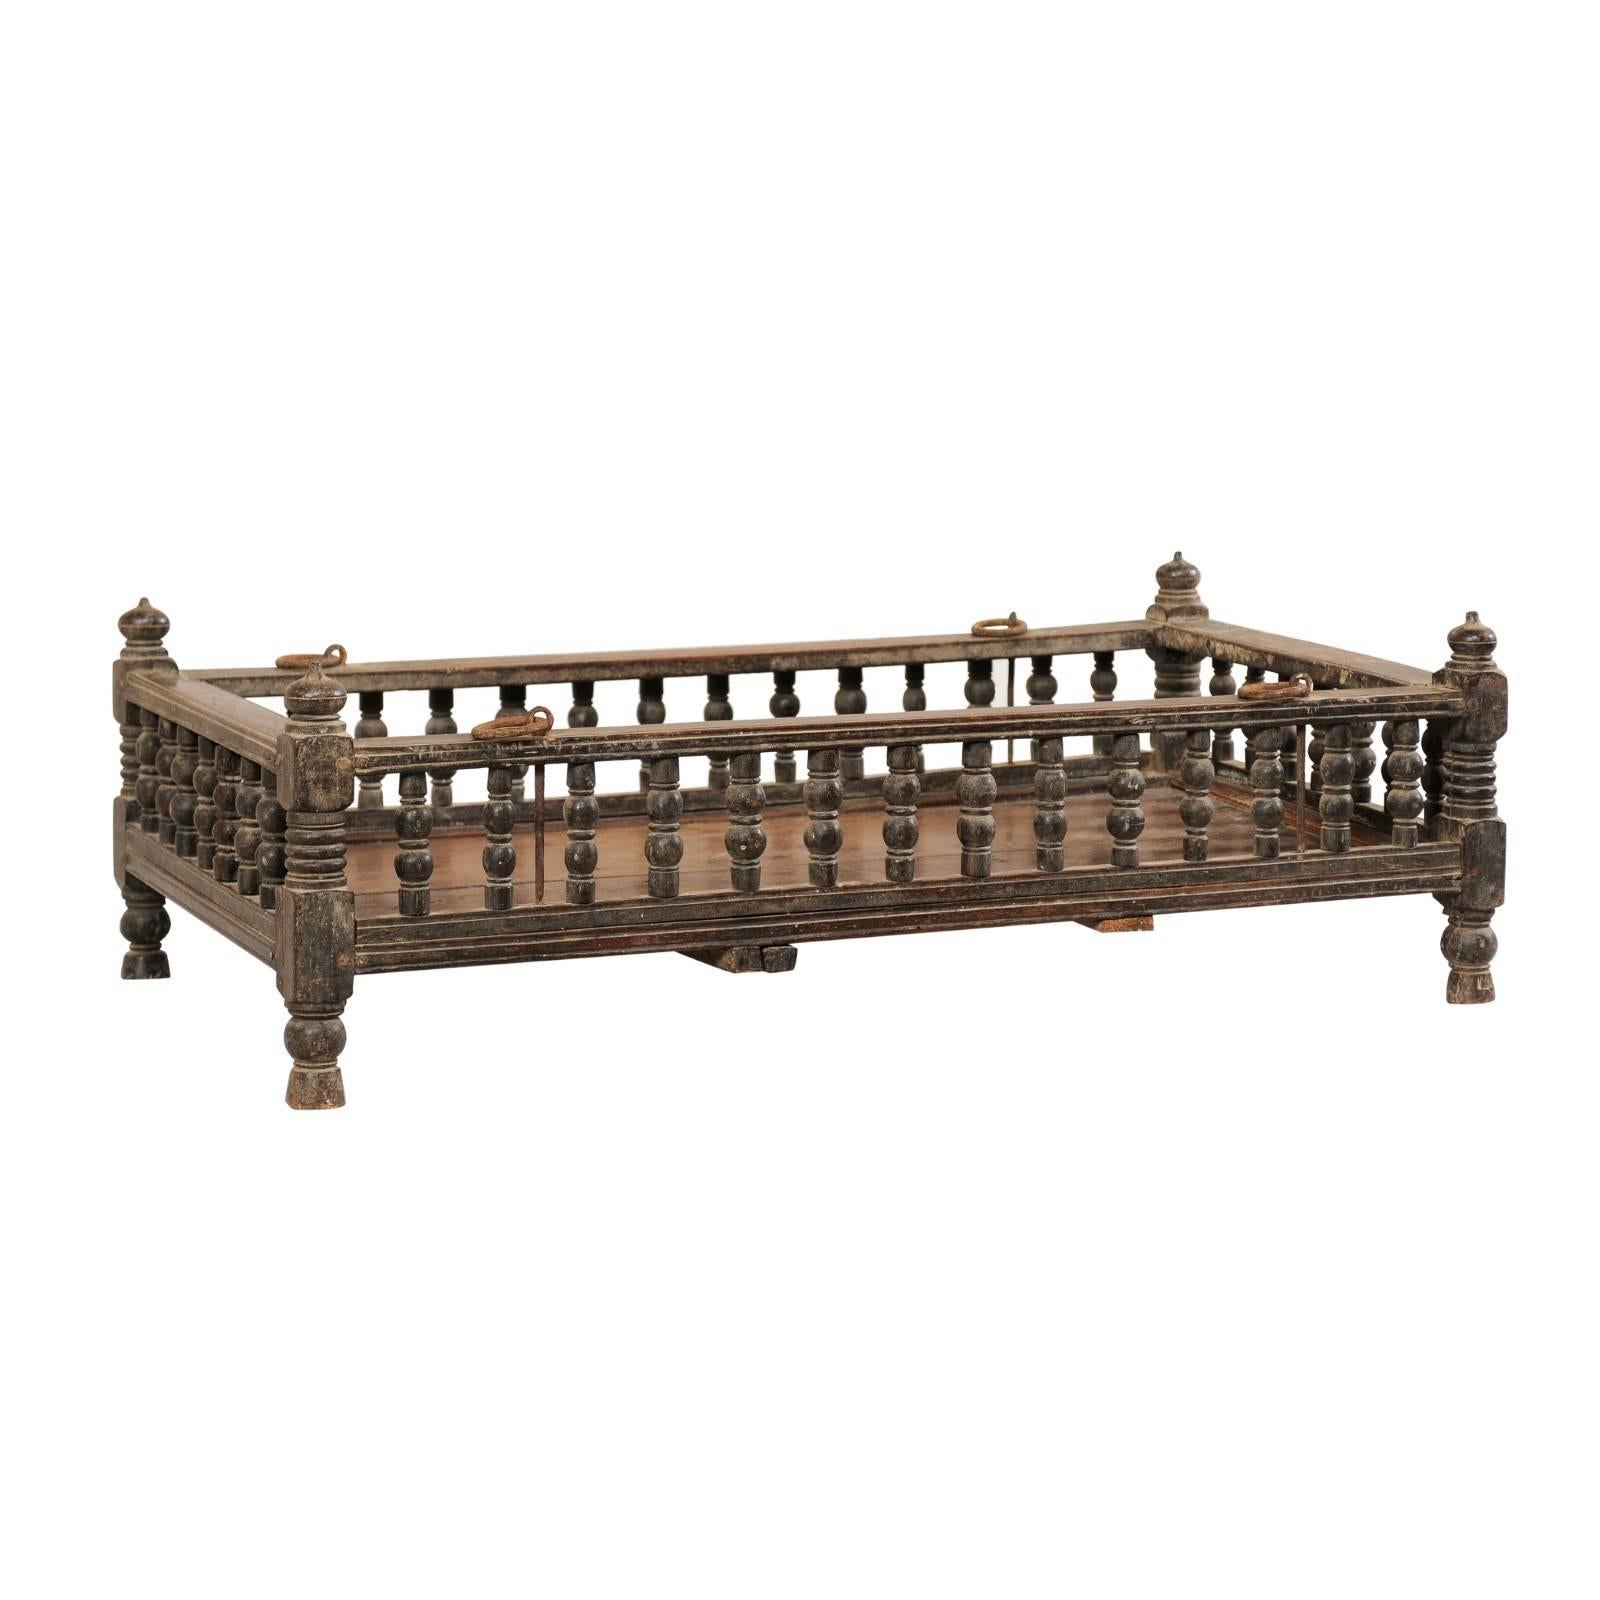 British Colonial Wooden Pet Bed / Bassinet from the Mid-20th Century